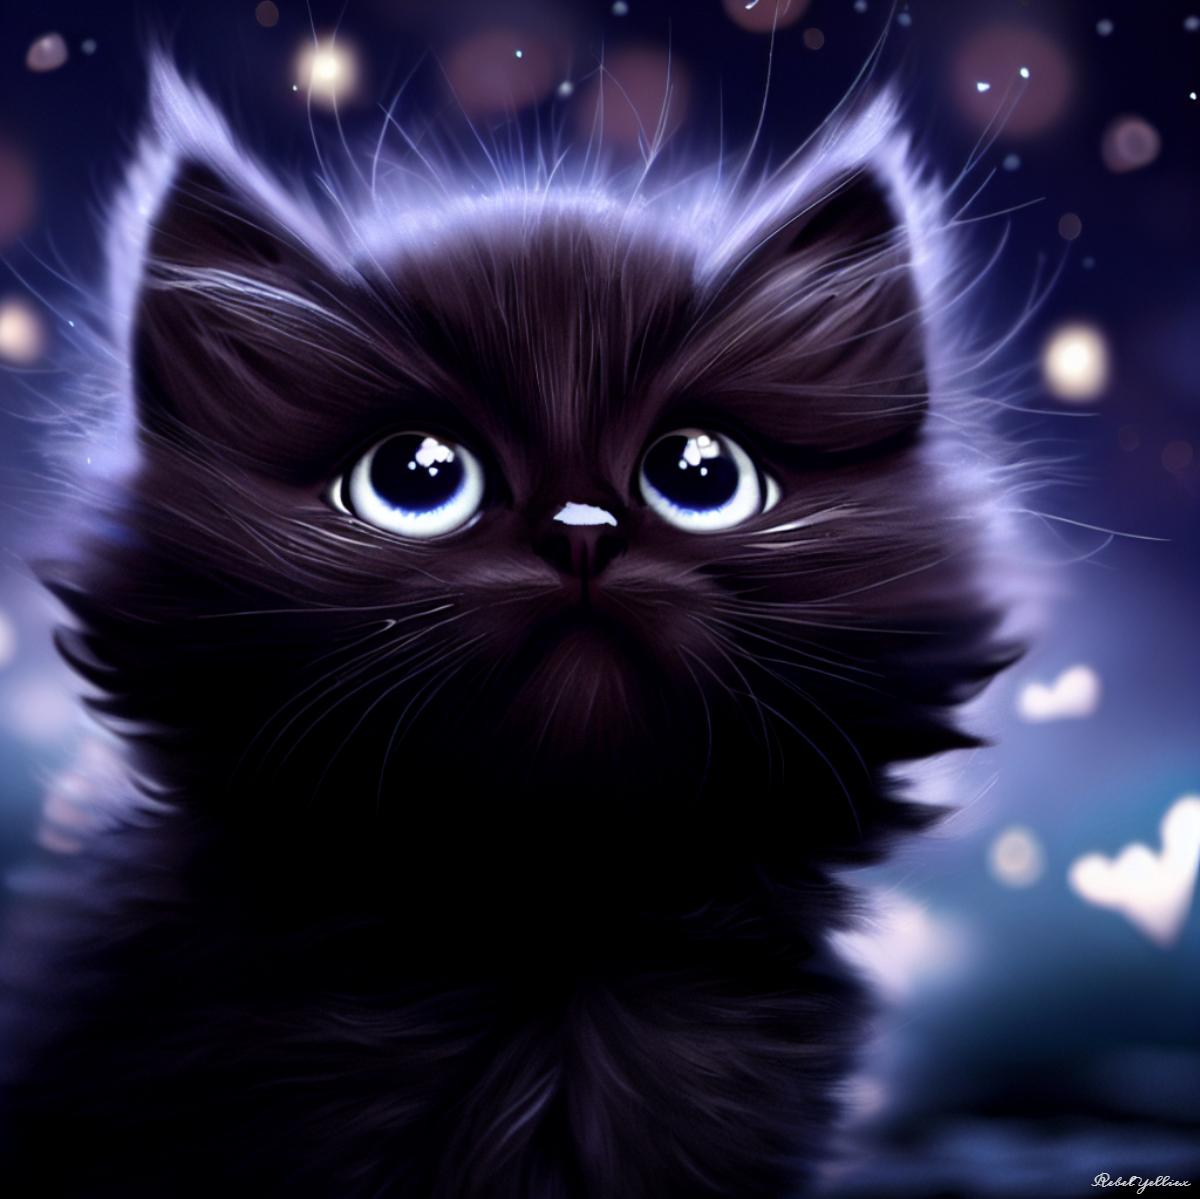 🔥 Download Black Fluffy Kitten Looks Up At Starry Sky By Xrebelyellx On ...